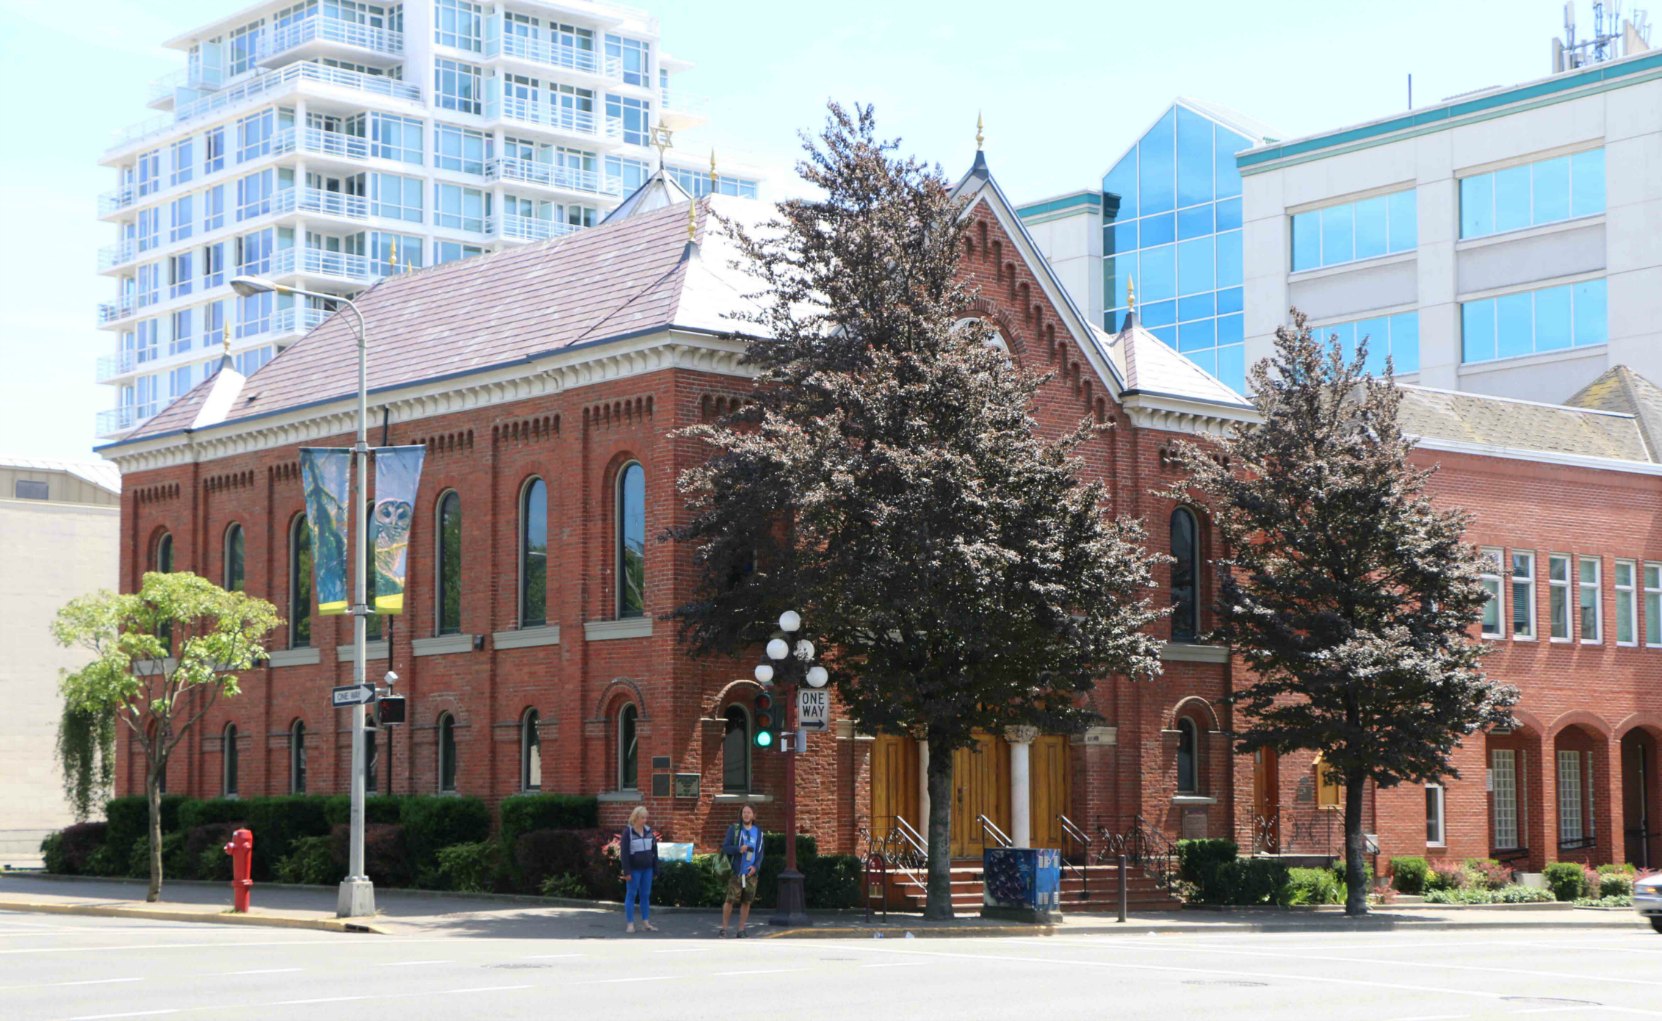 The Congregation Emanu-el, 1461 Blanshard Street. Dedicated in 1863, it is the oldest synagogue in western Canada